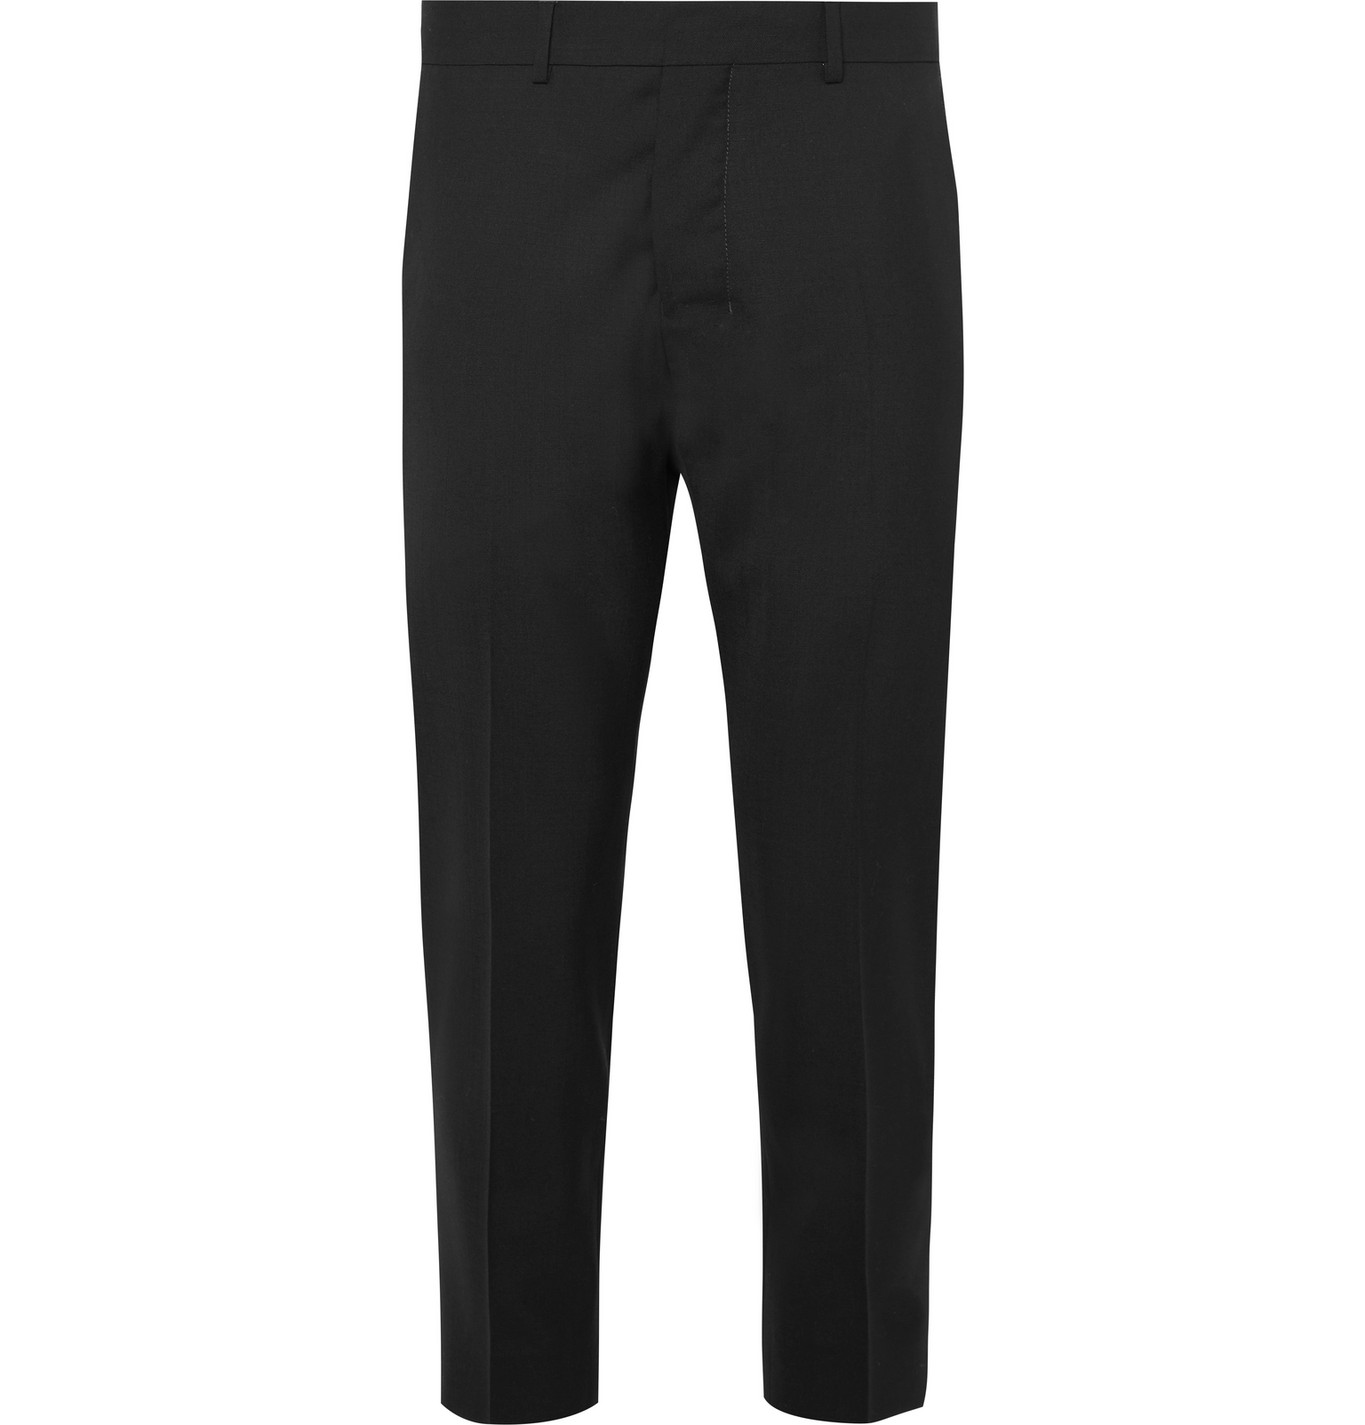 AMI - Black Cropped Wool Suit Trousers - Men - Black | The Fashionisto